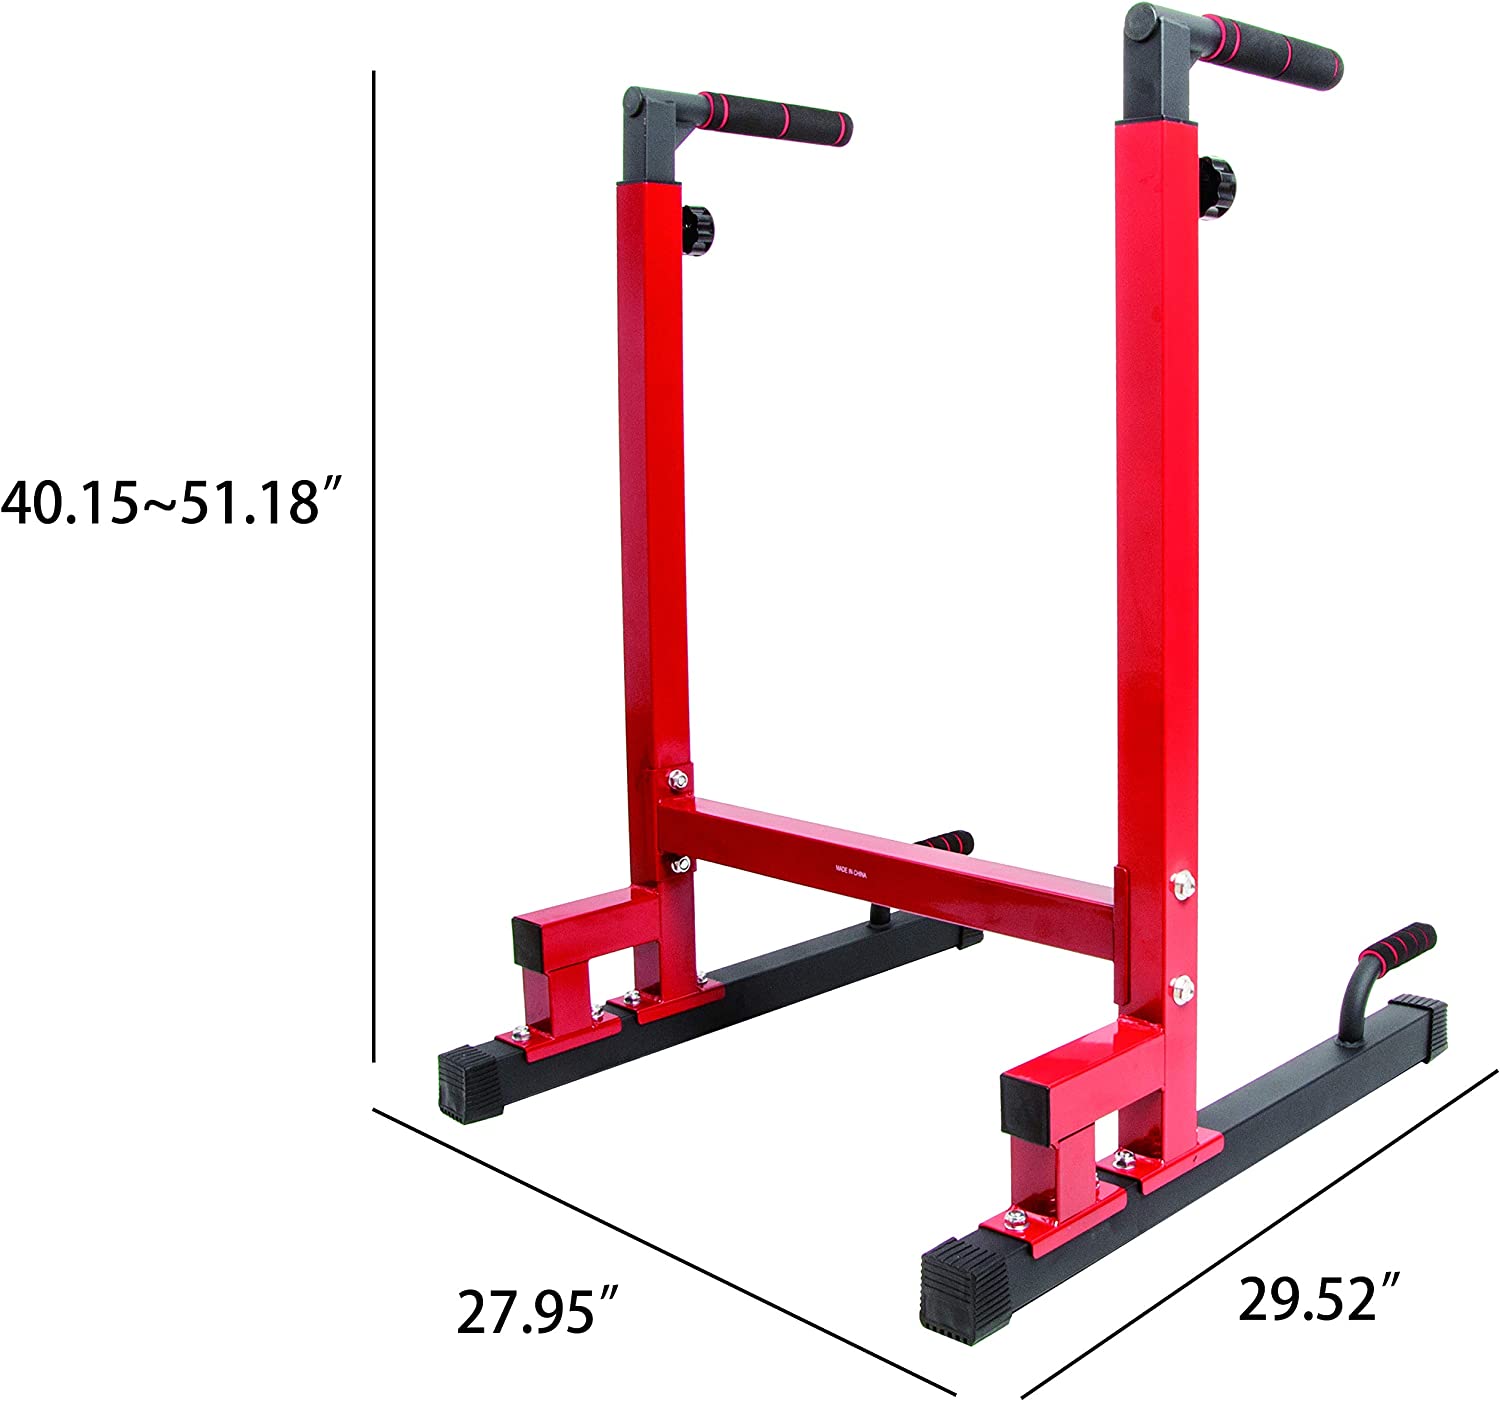 Adjustable height heavy duty dip stand